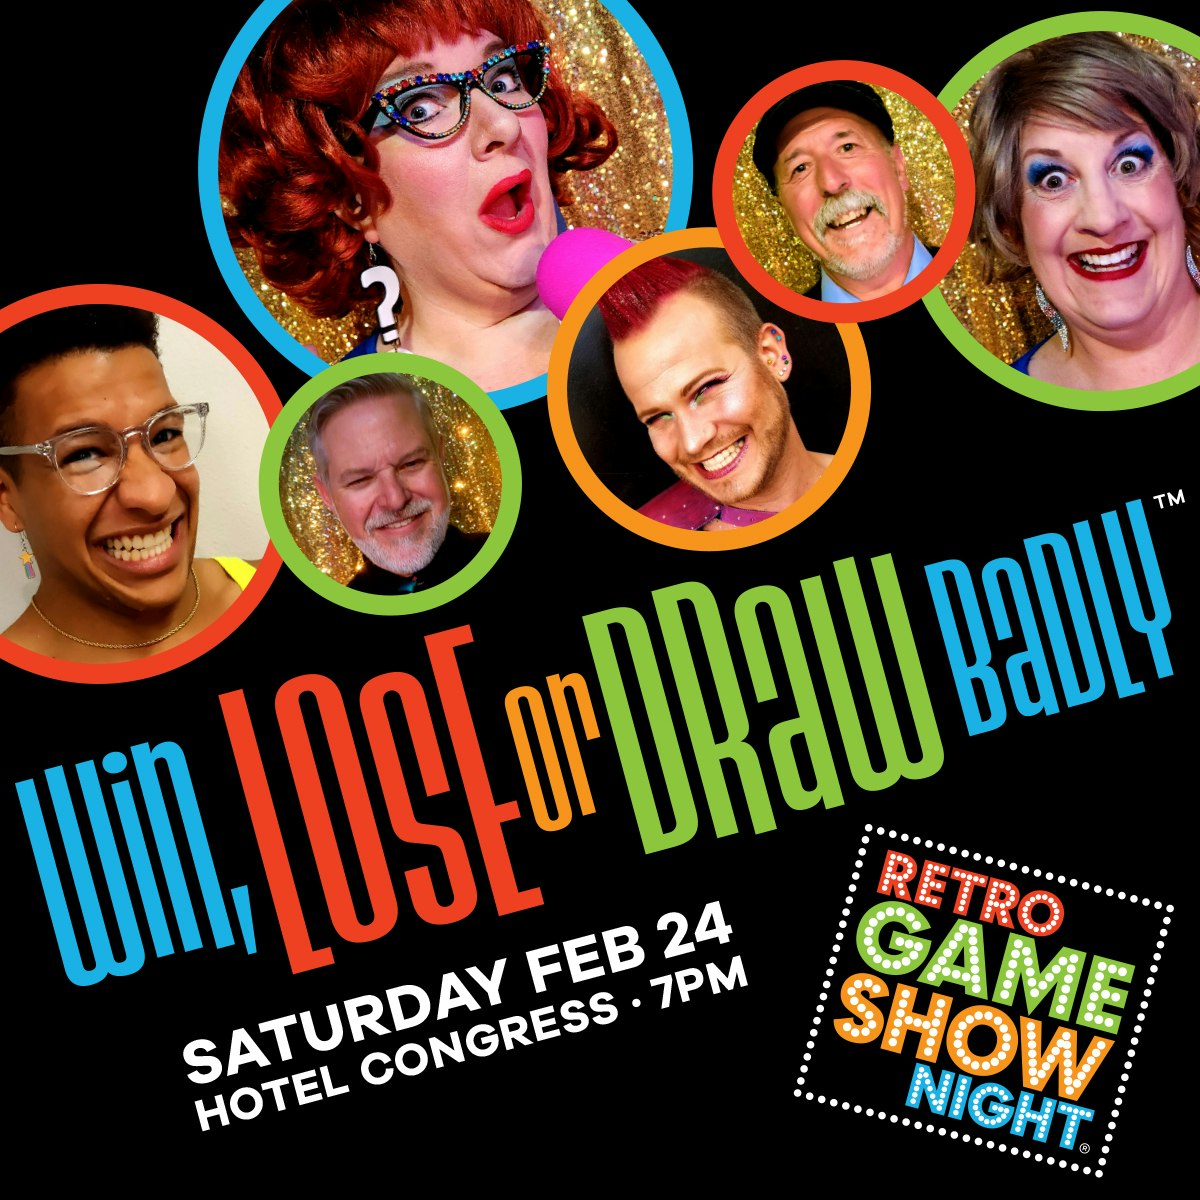 Retro Game Show Night Presents: Win, Lose, or Draw Badly!